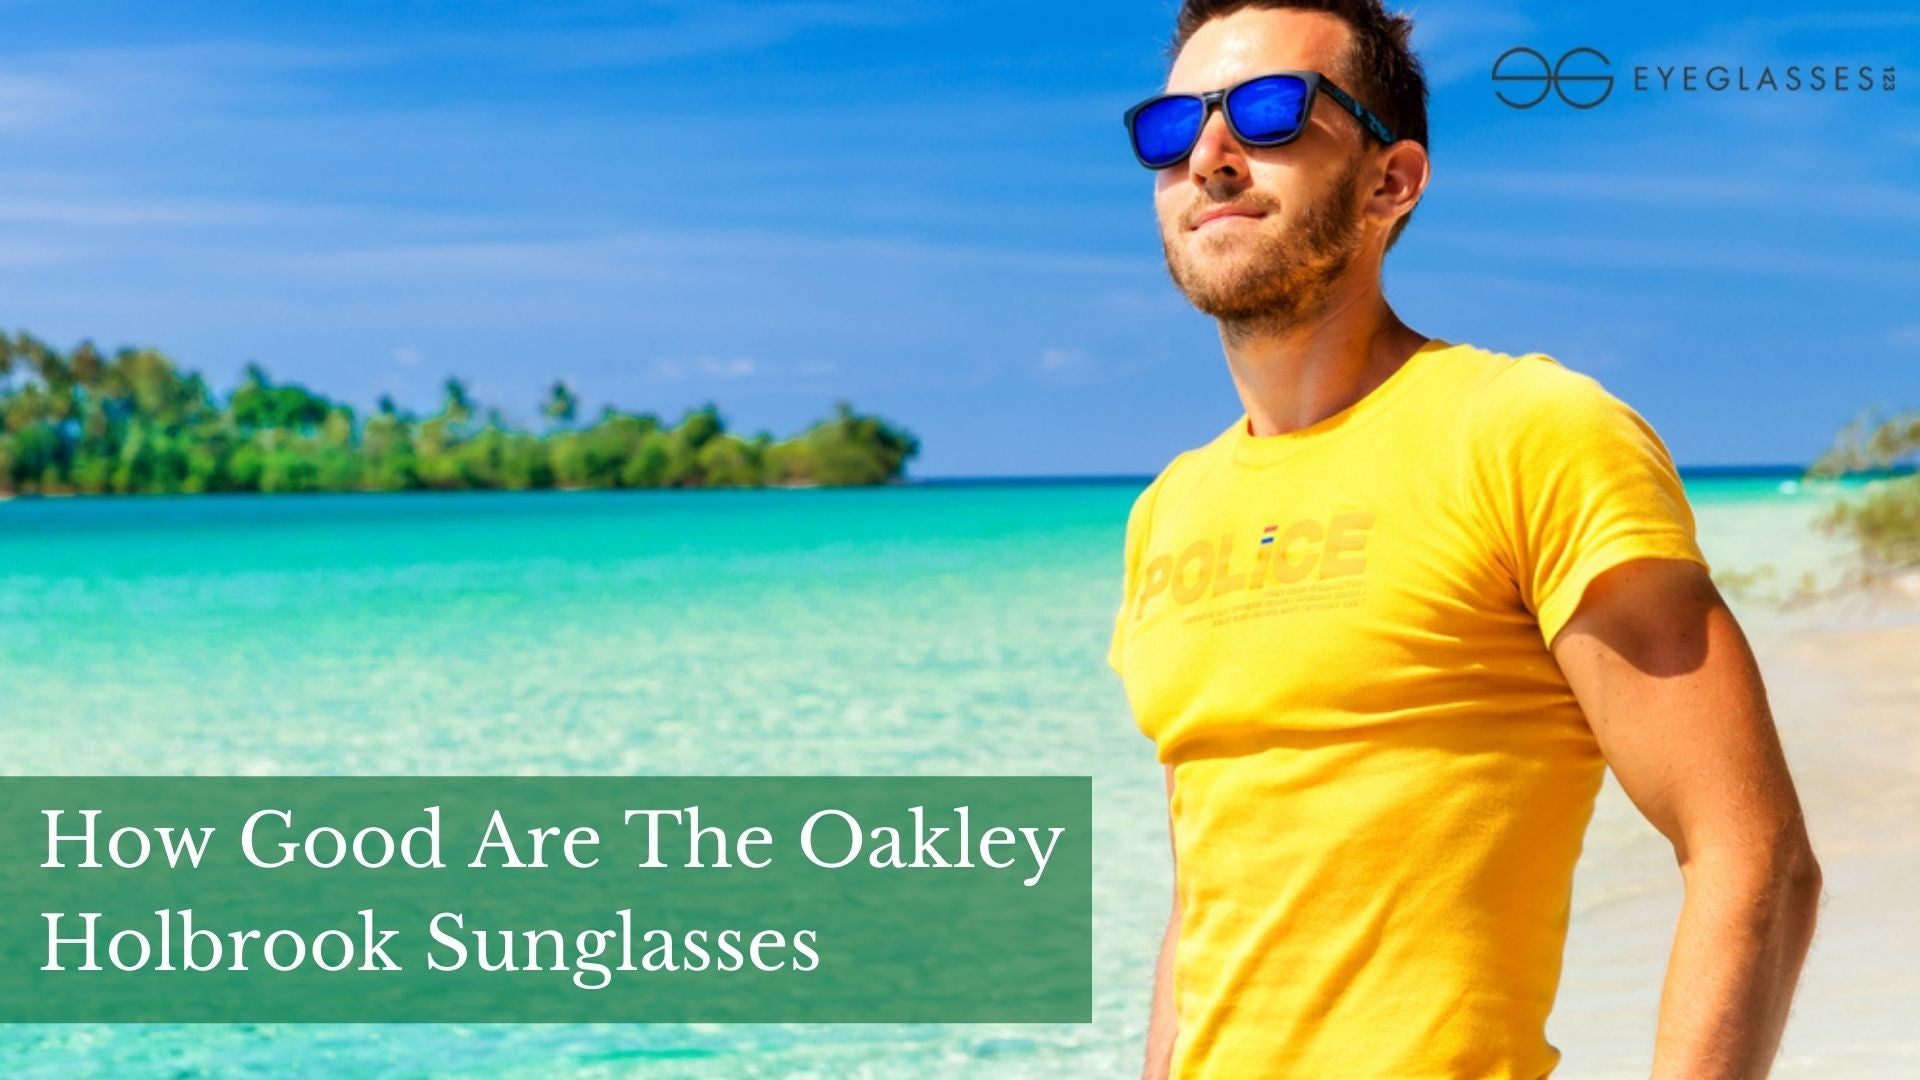 How Good Are The Oakley Holbrook Sunglasses